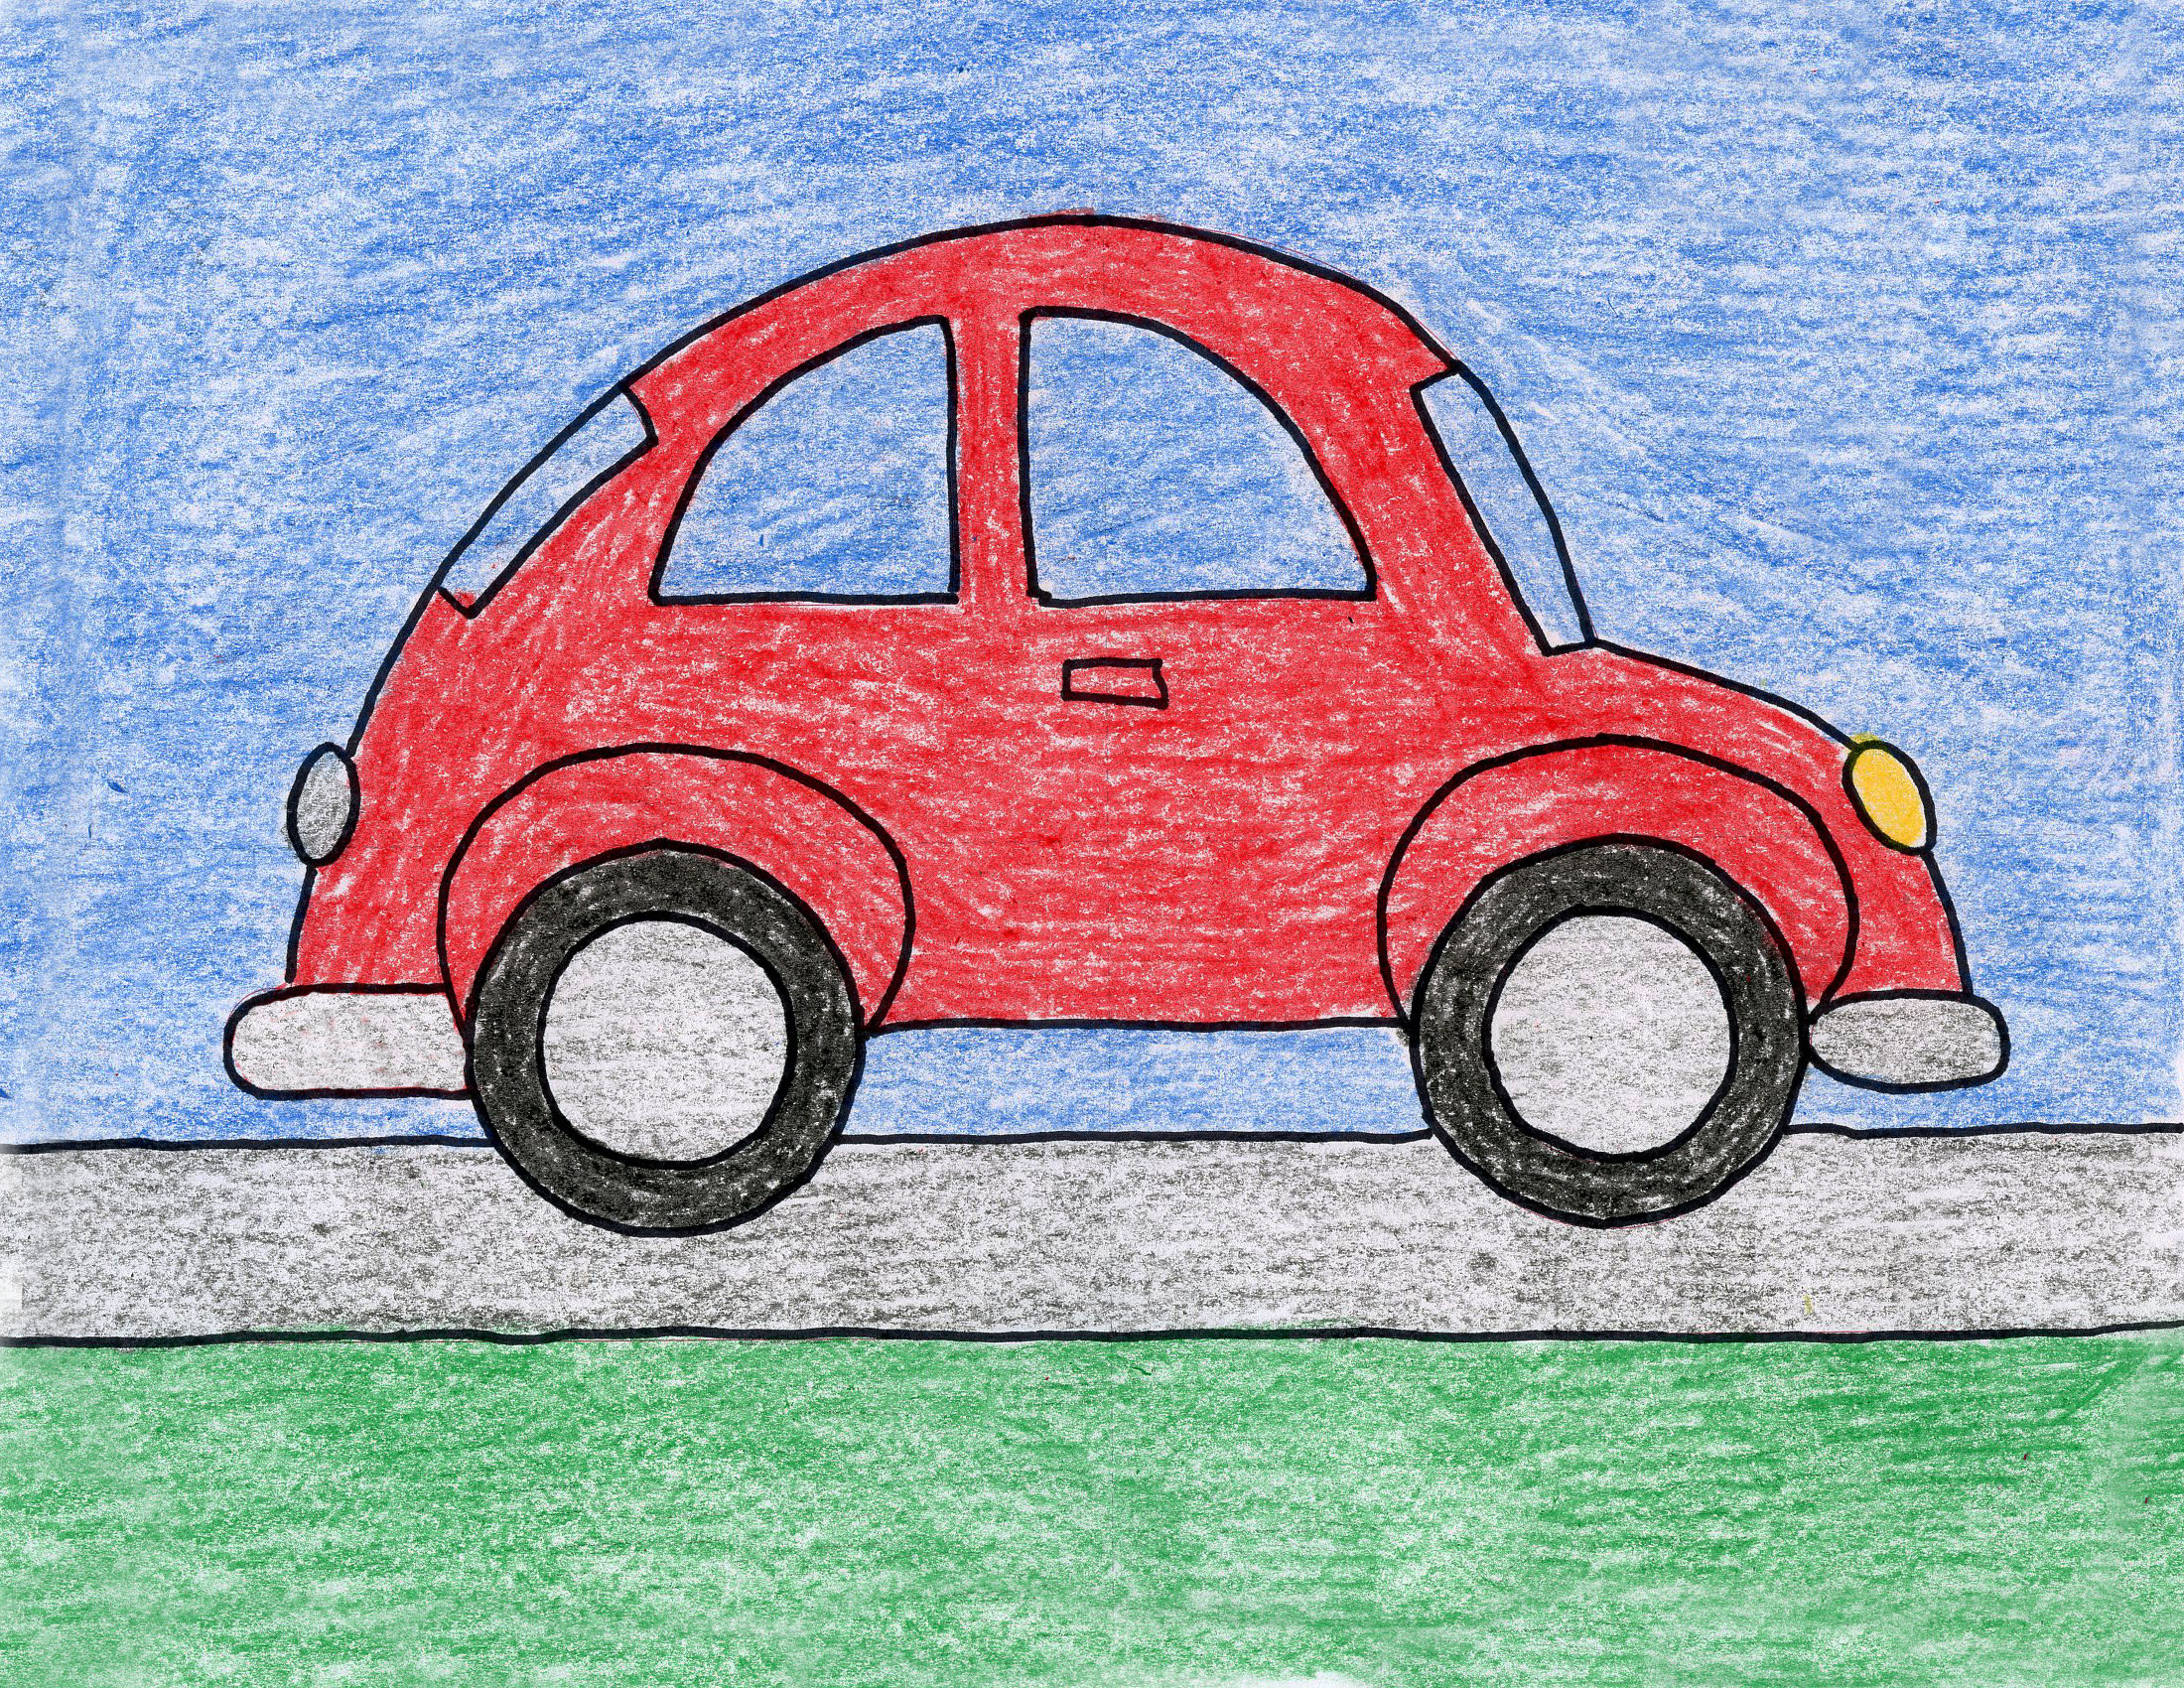 How To Draw Easy Car Drawings Easy Drawing Car At Getdrawings